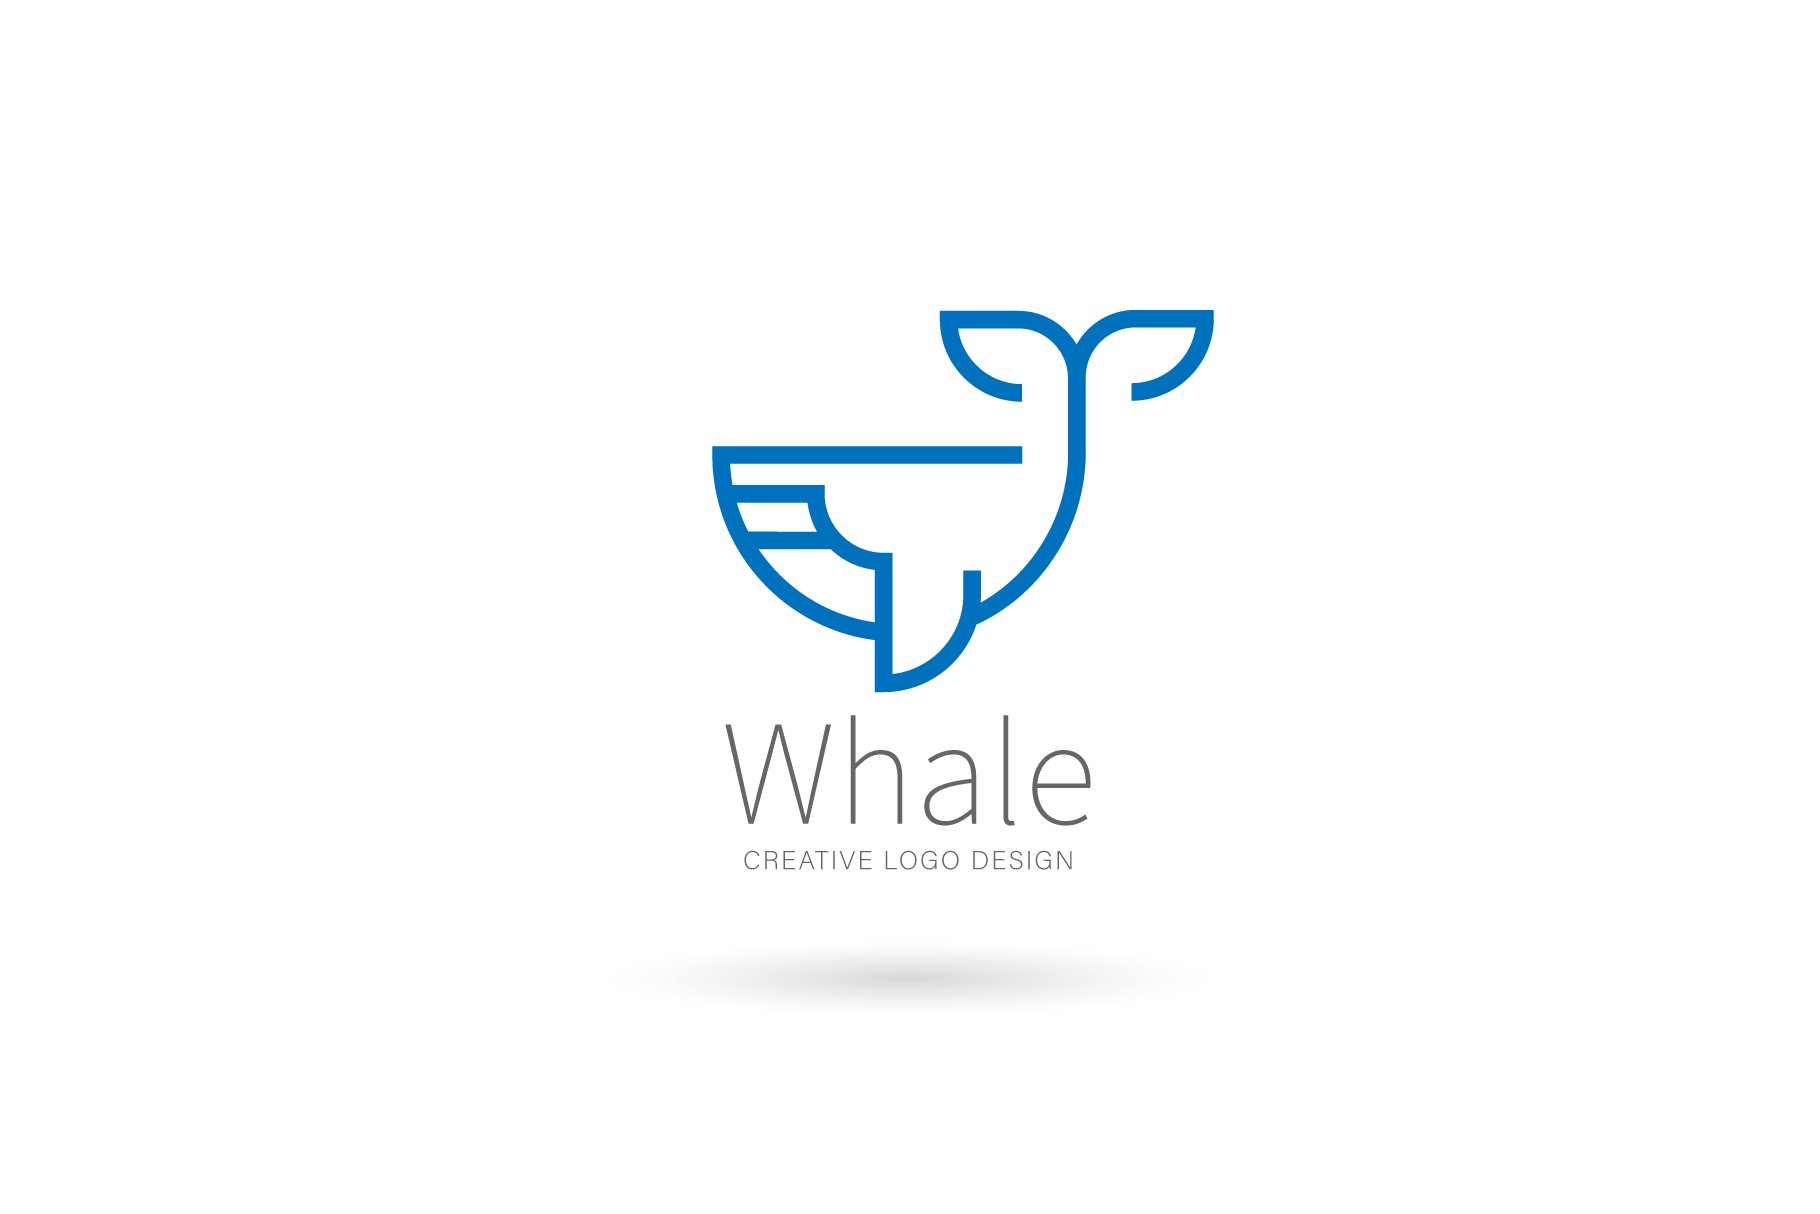 Whale logo cover image.